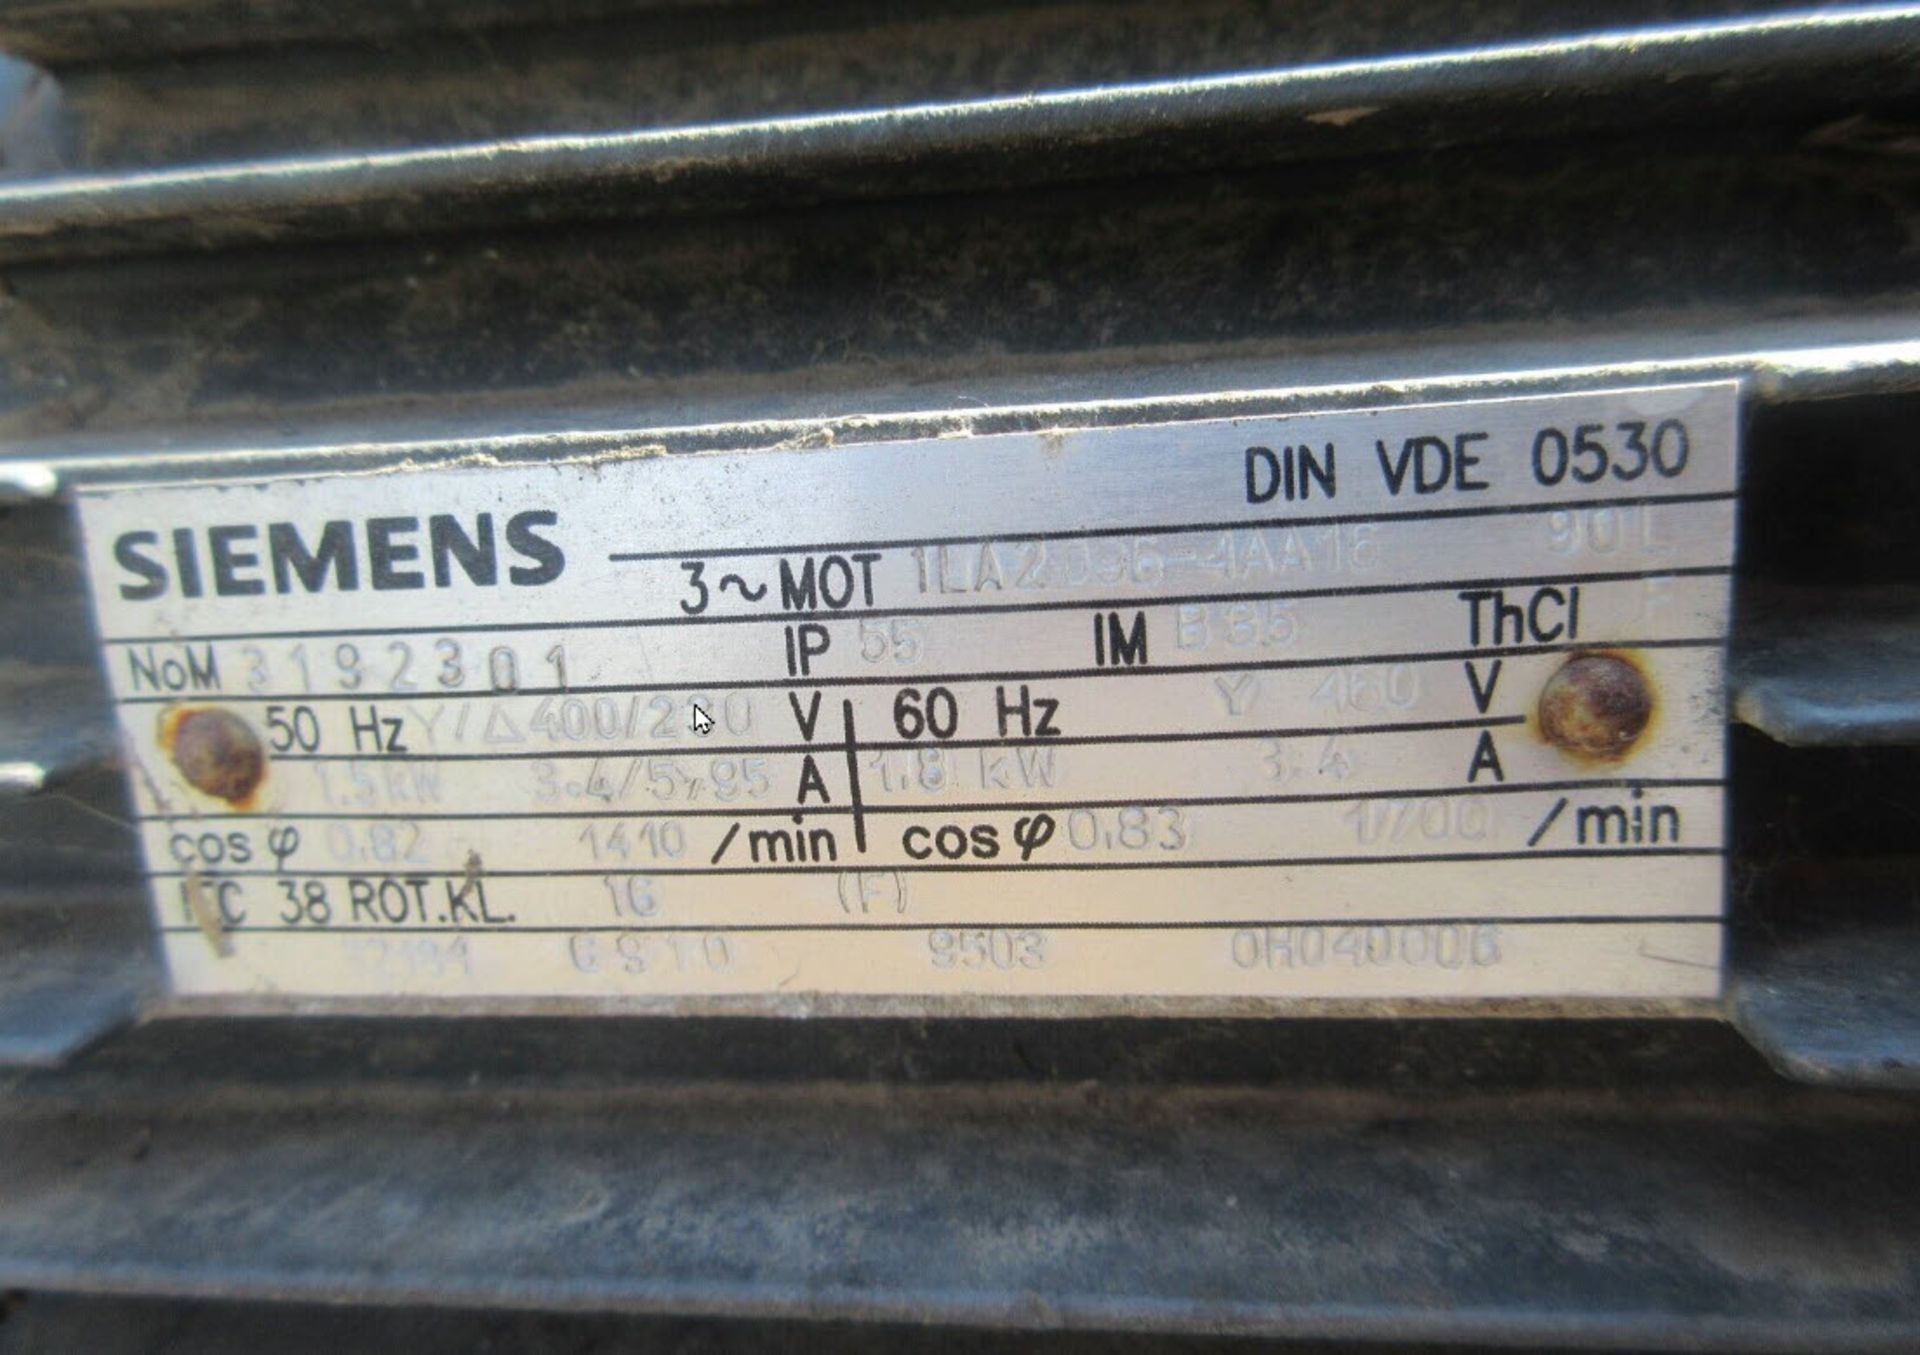 (Located in Hollister, CA) Siemens Coating System Coating Pump, Rigging Fee: $100 - Image 8 of 11